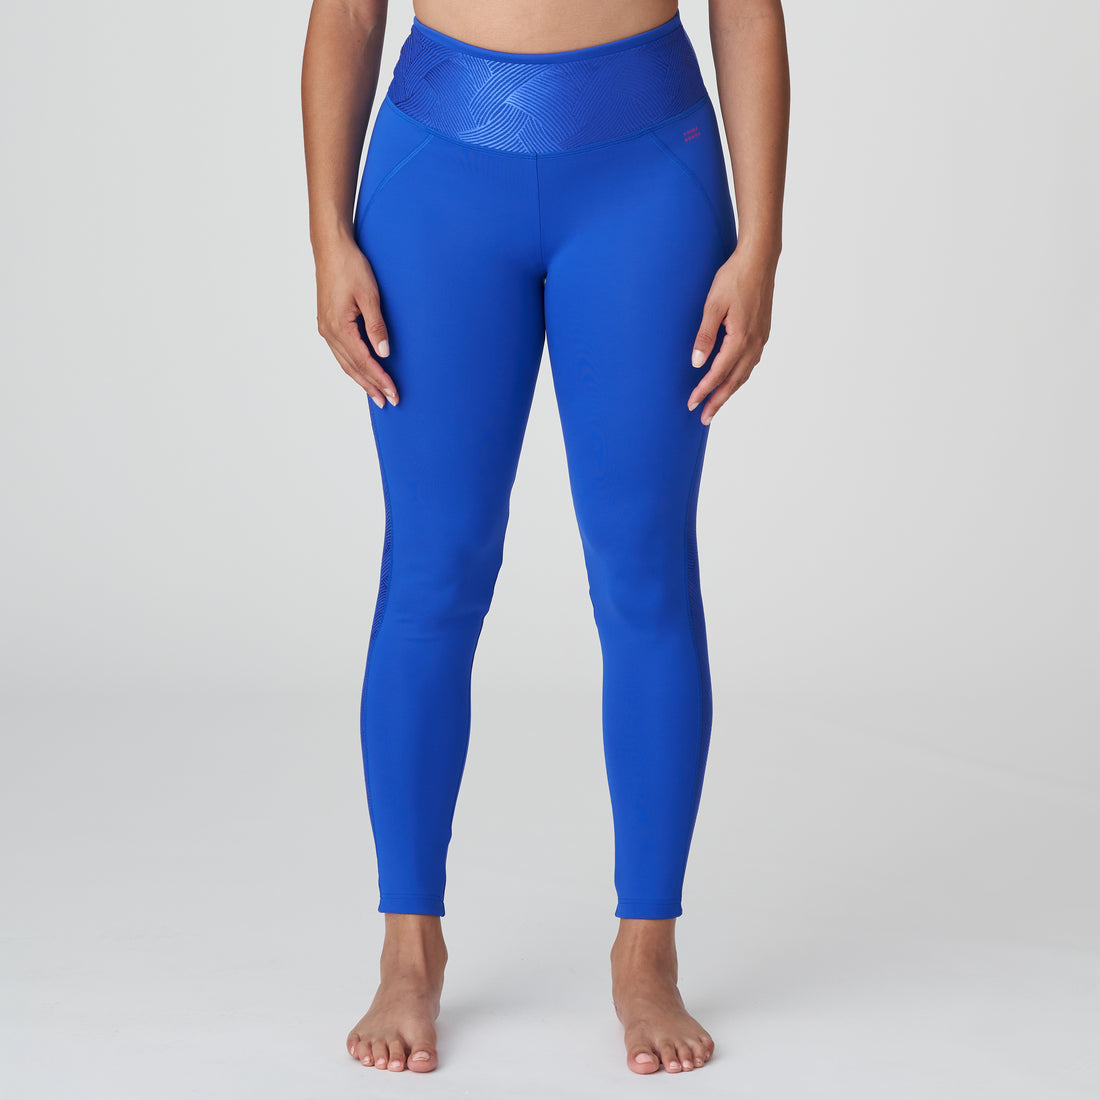 Primadonna Sport The Game Sports Pants (6000580) Electric Blue